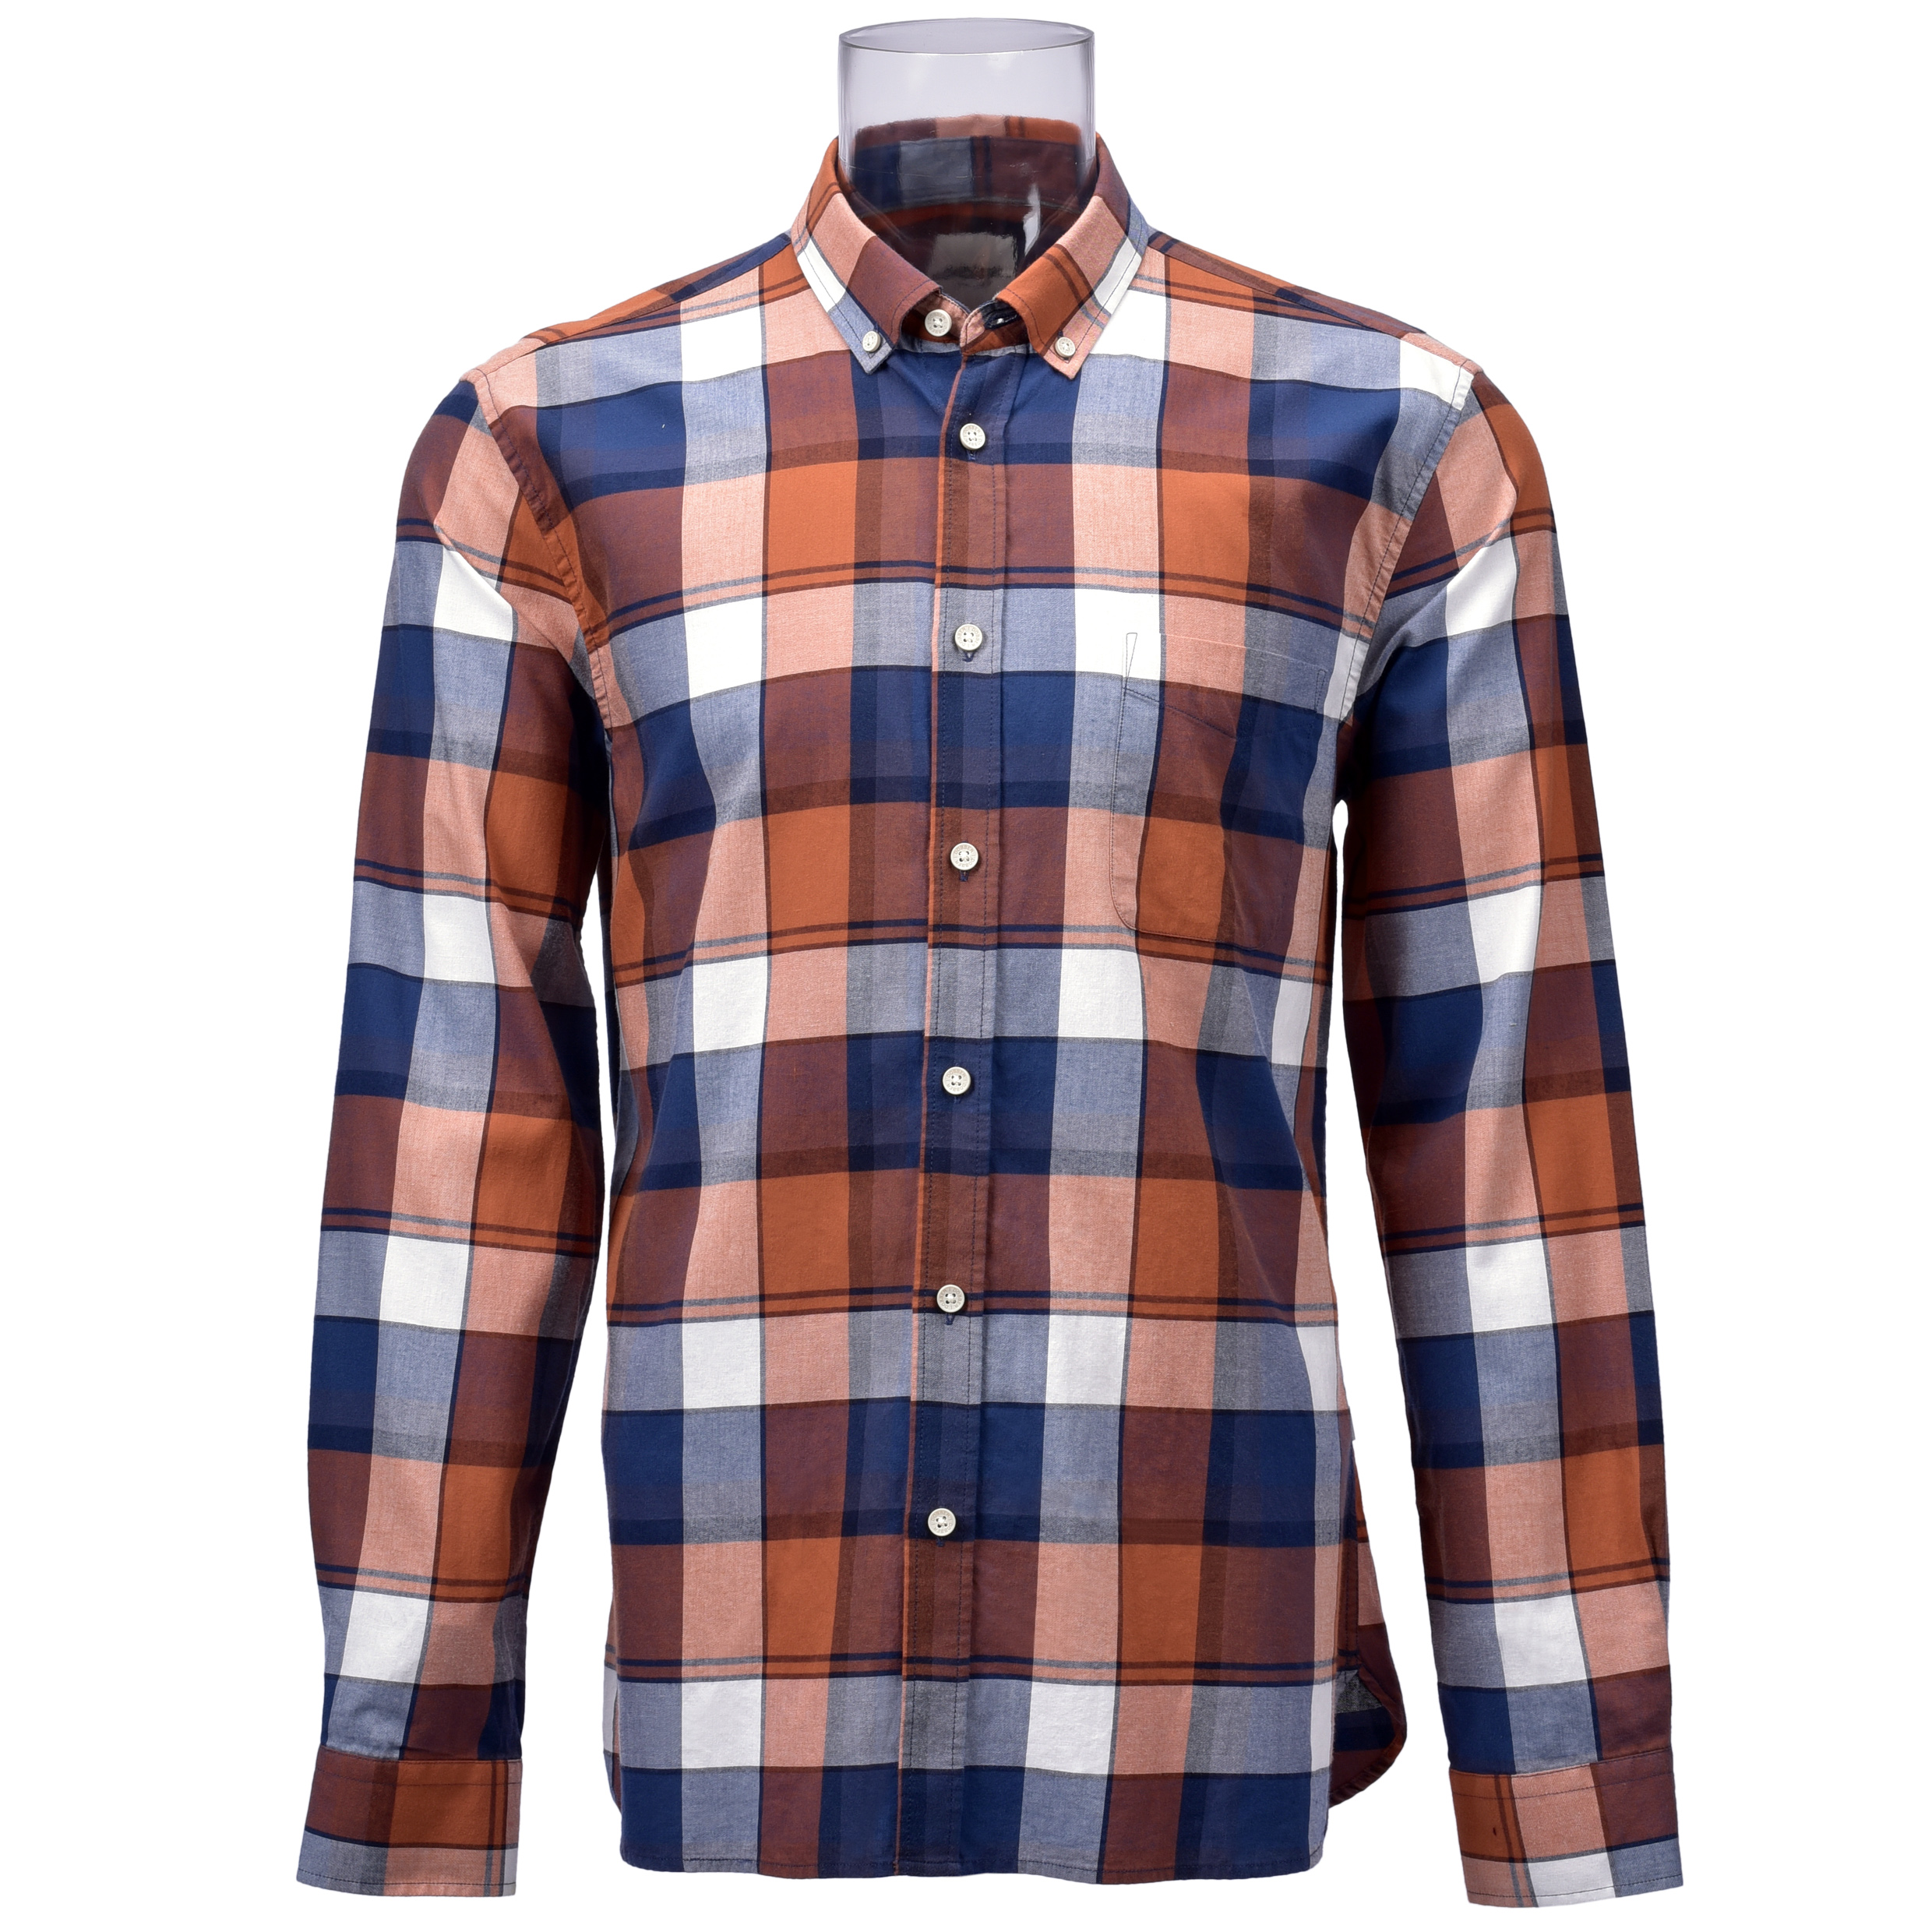 Men's Sustainable Shirt 100% BCI Cotton Long Sleeve Check Shirt For Men